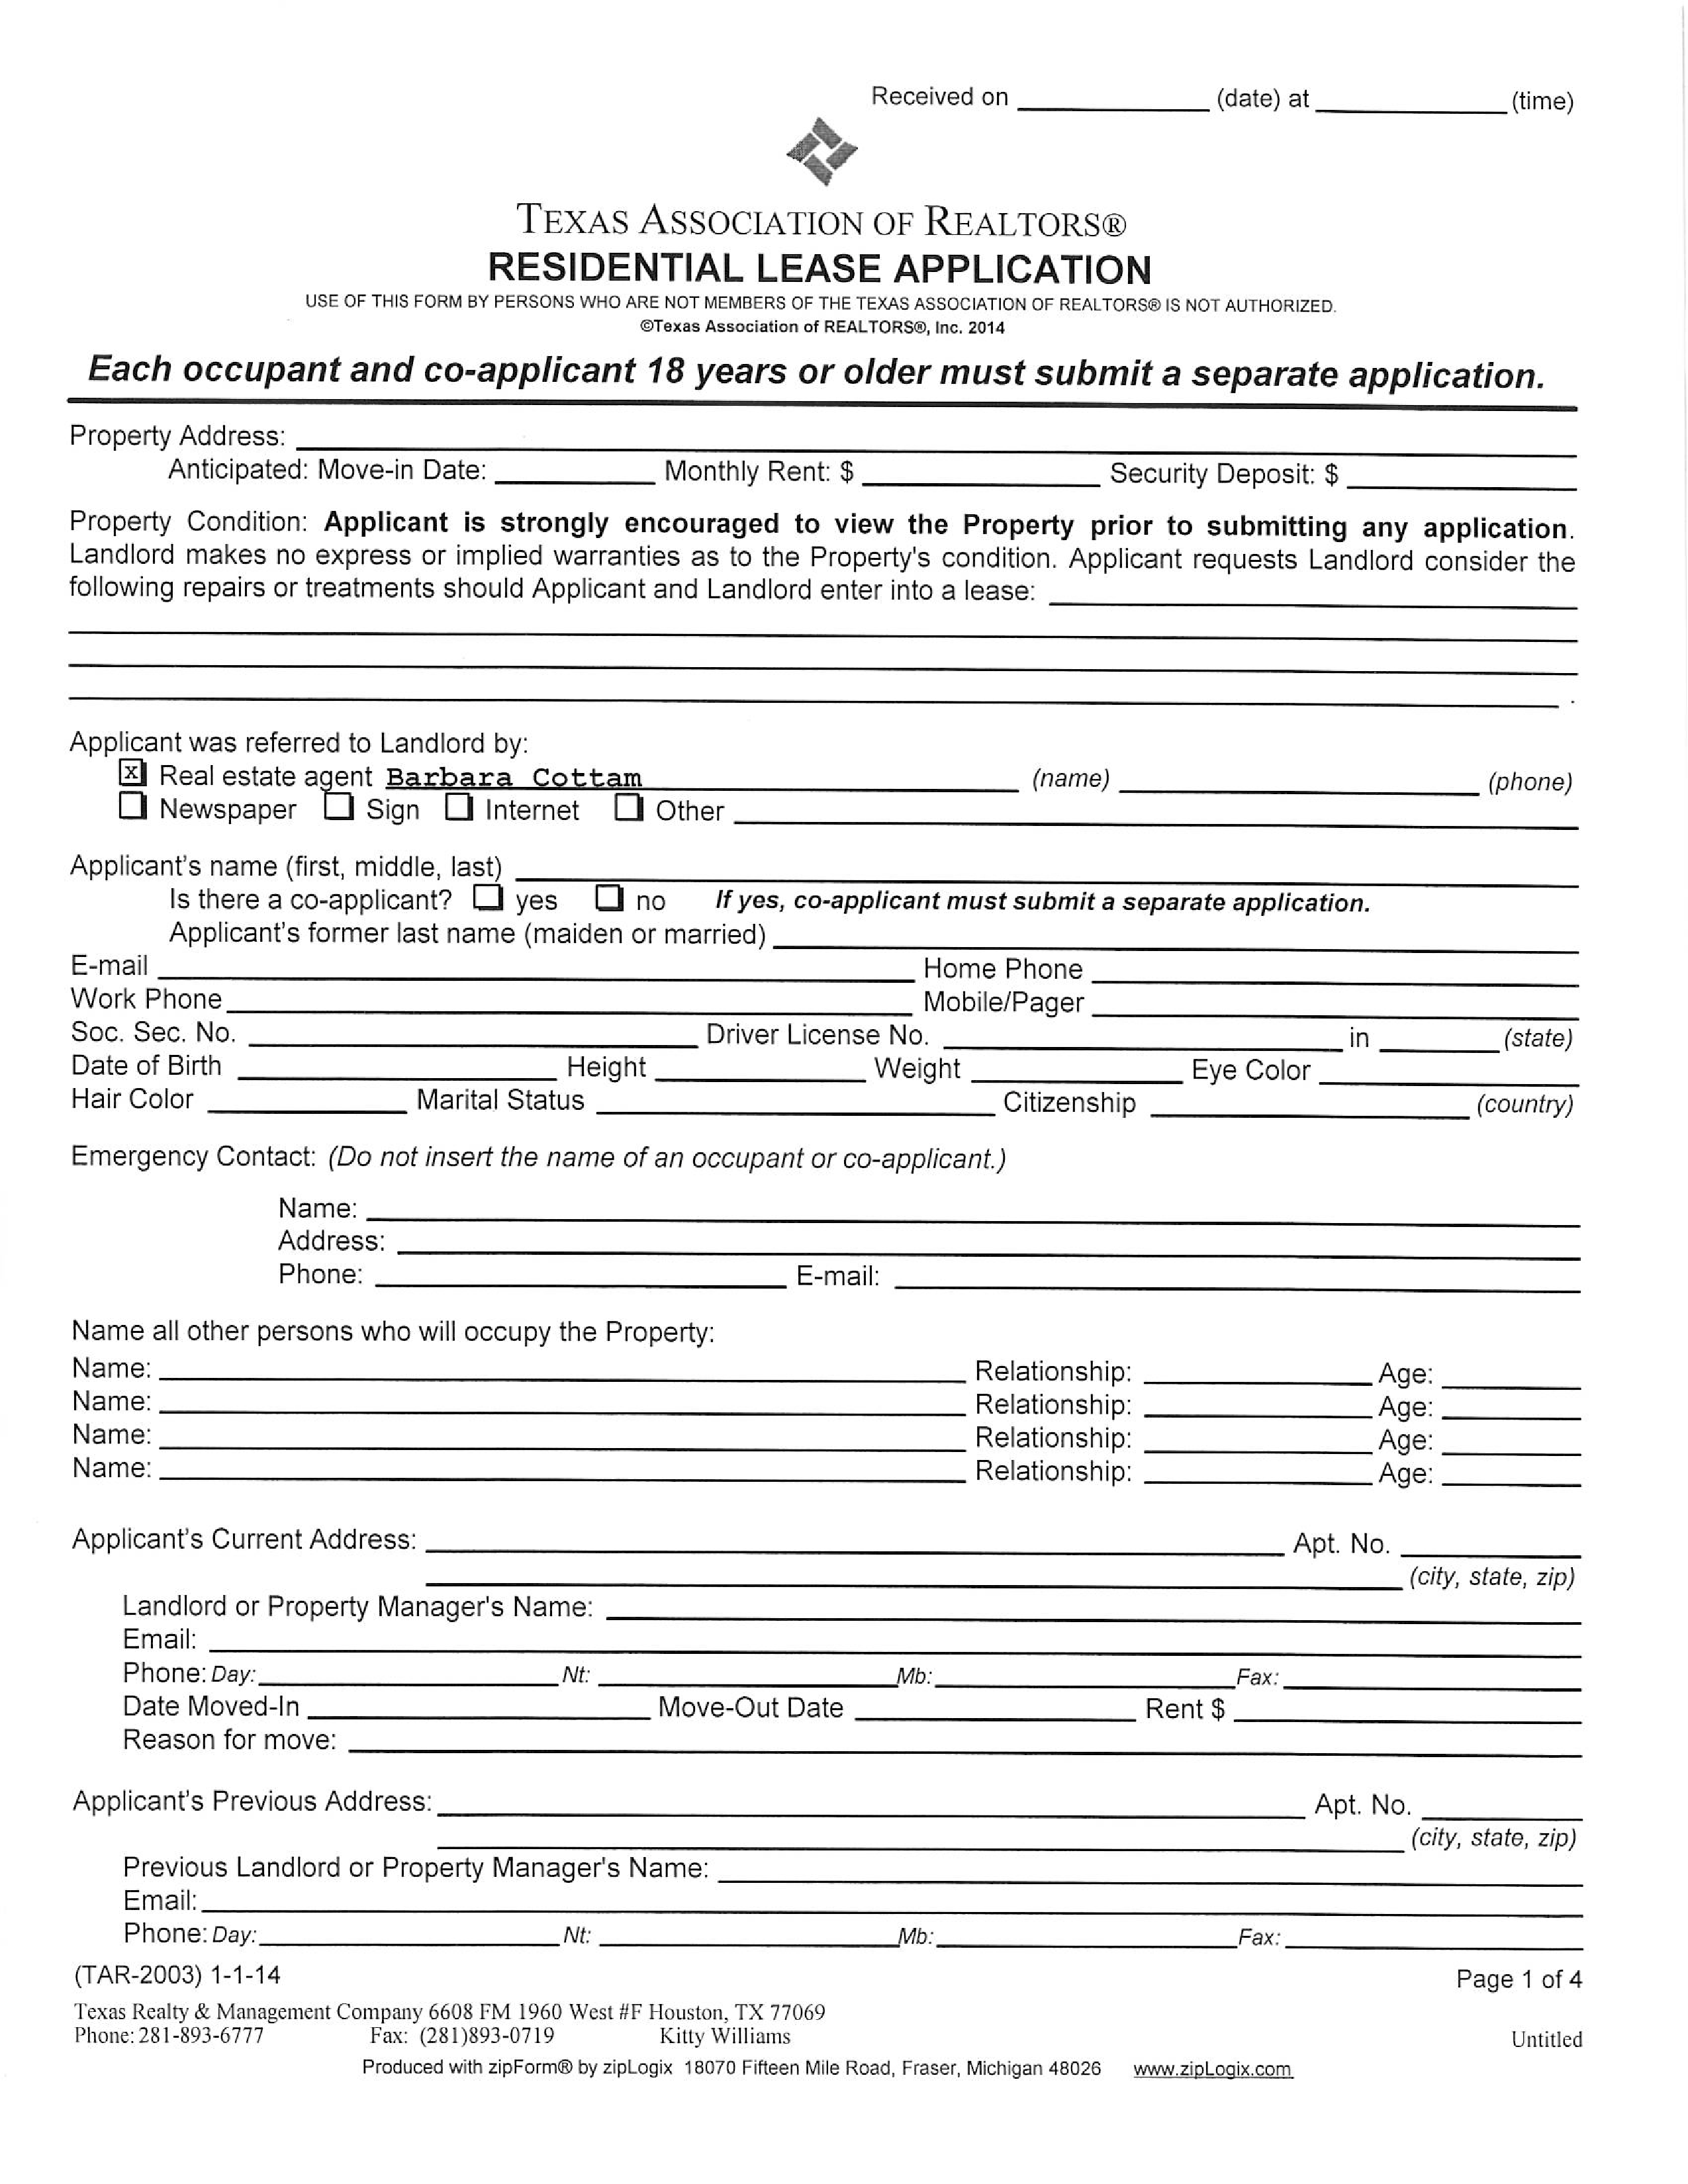 Residential Lease Application Form by Realtor main image